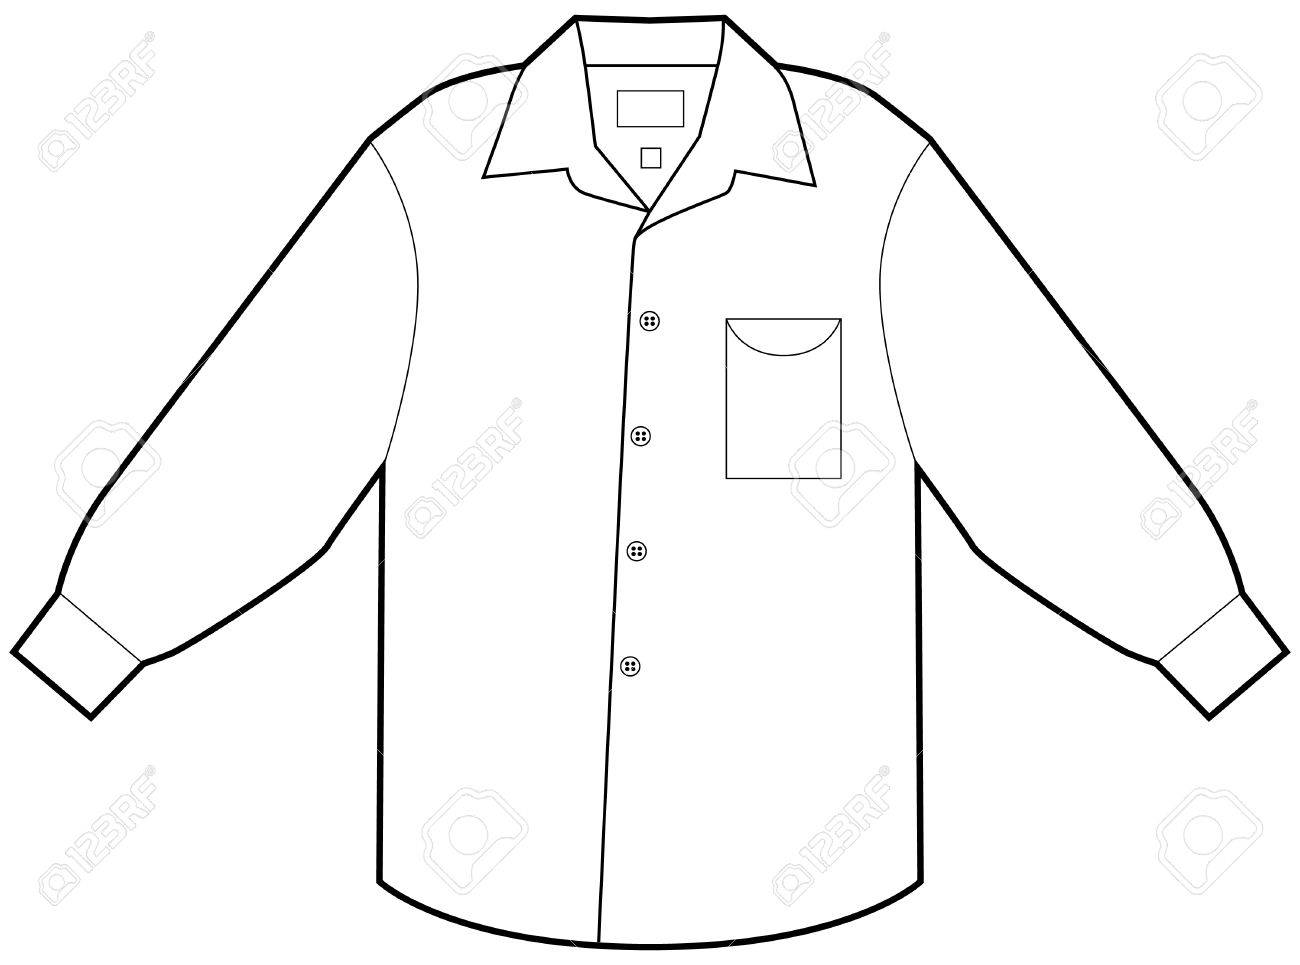 Business dress shirt isolated on a white background. Stock Vector - 6258145